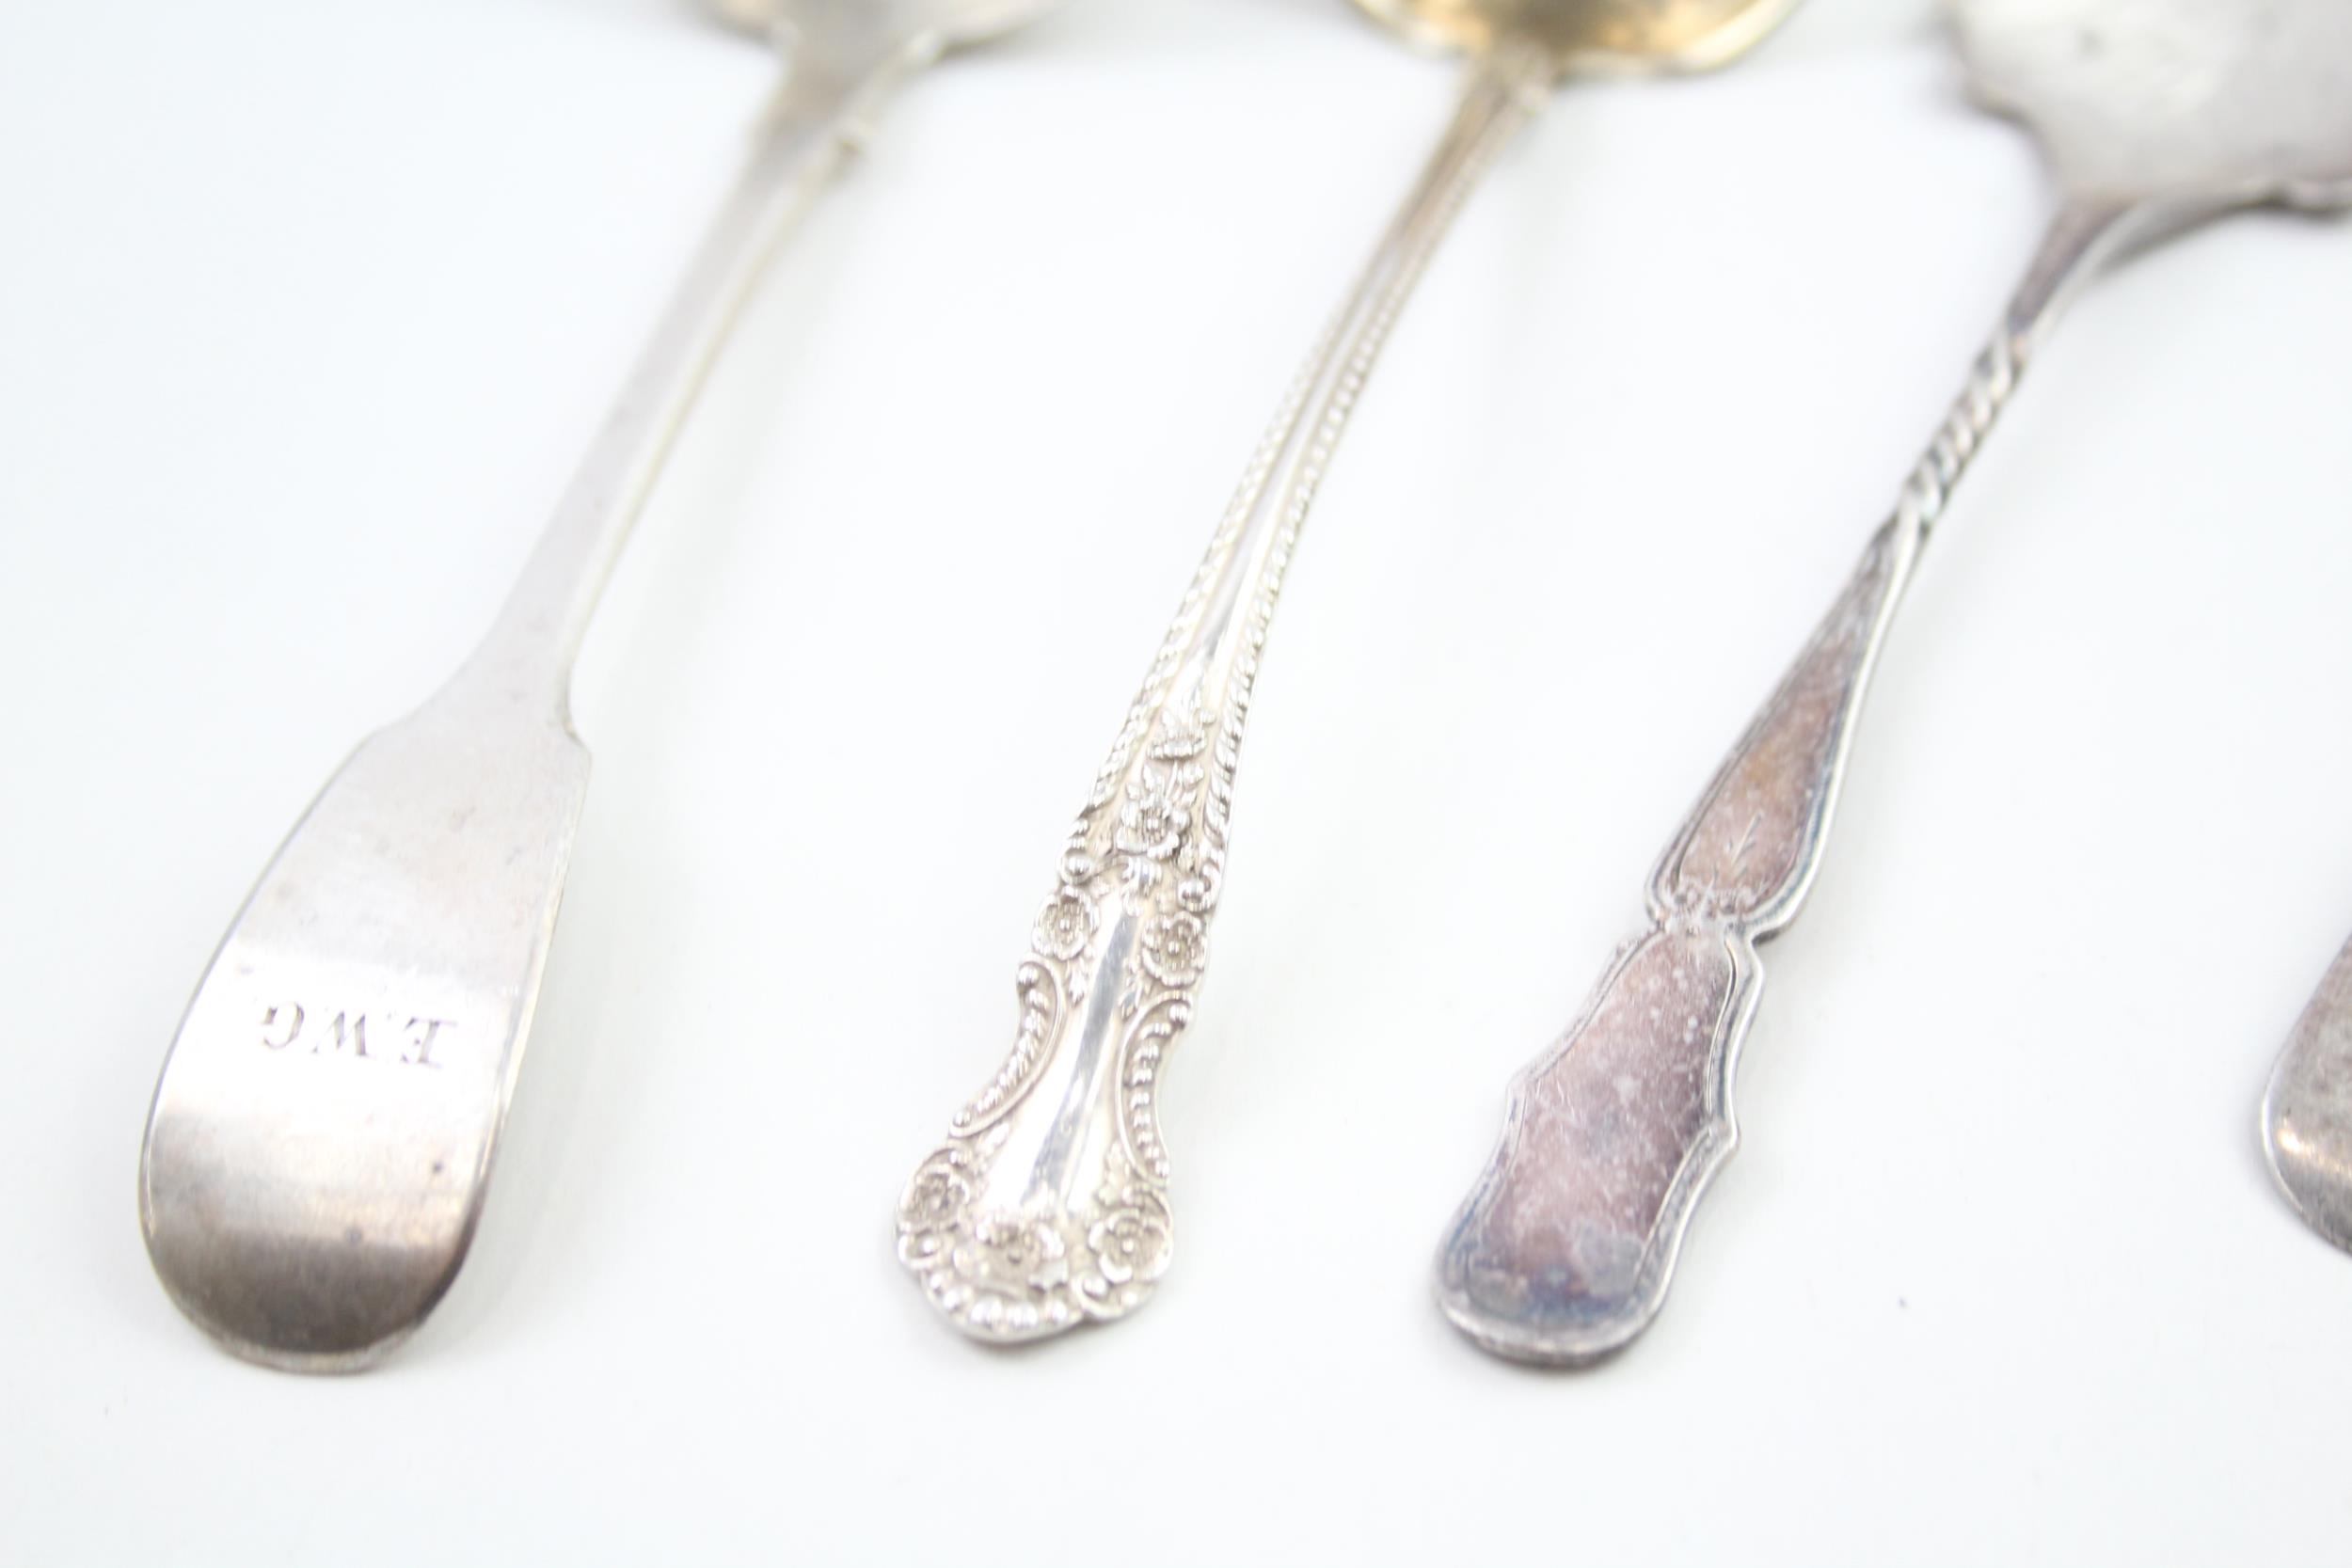 9 x Antique Vintage HM .925 Sterling Silver Spoons Inc Bottom Marked Etc (100g) - In antique / - Image 3 of 7